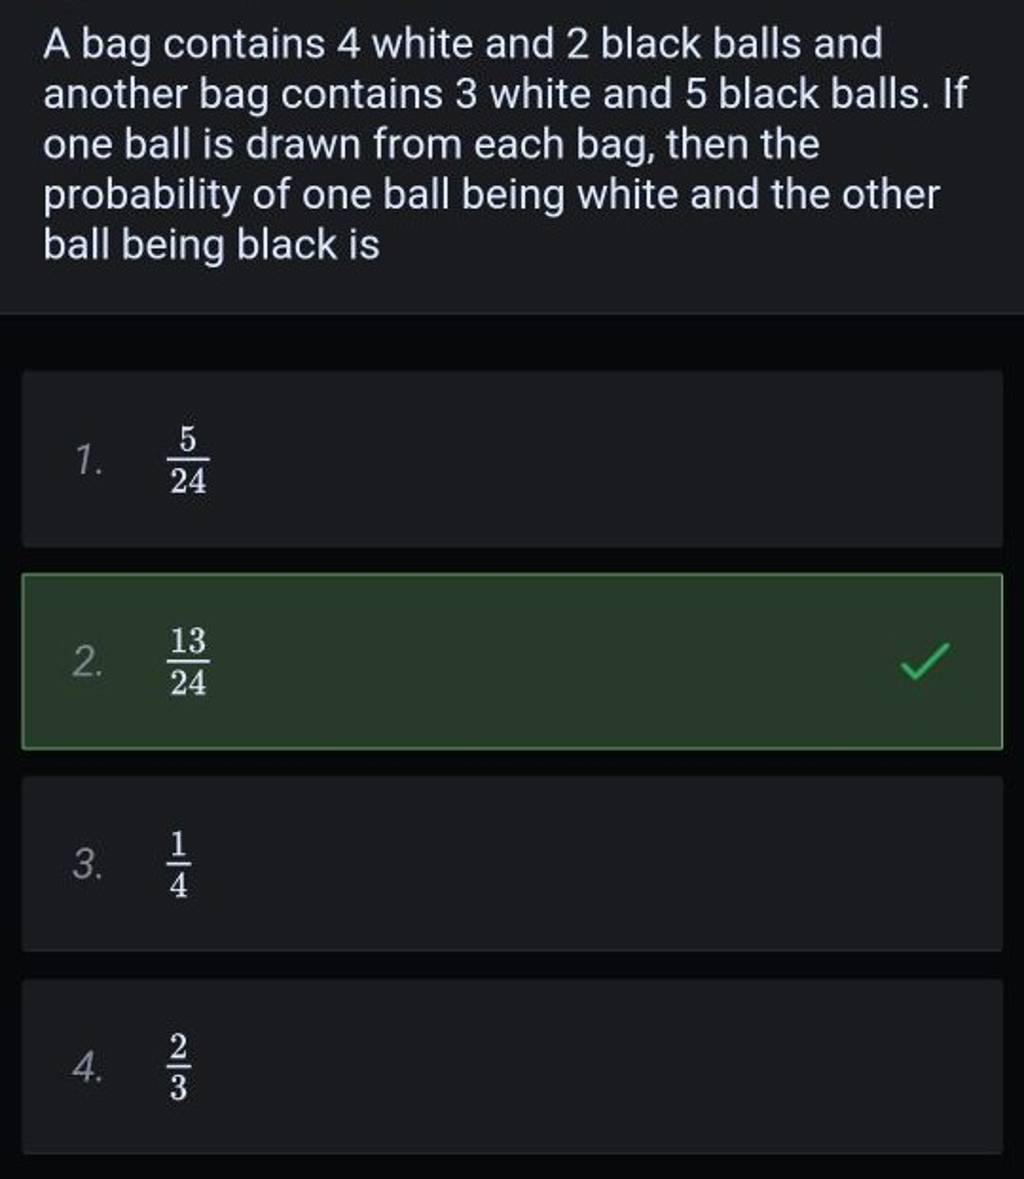 There are two bags , bag I and bag II . Bag I contains 4 white and 3 red  balls while another bag II contains 3 white and 7 red balls .